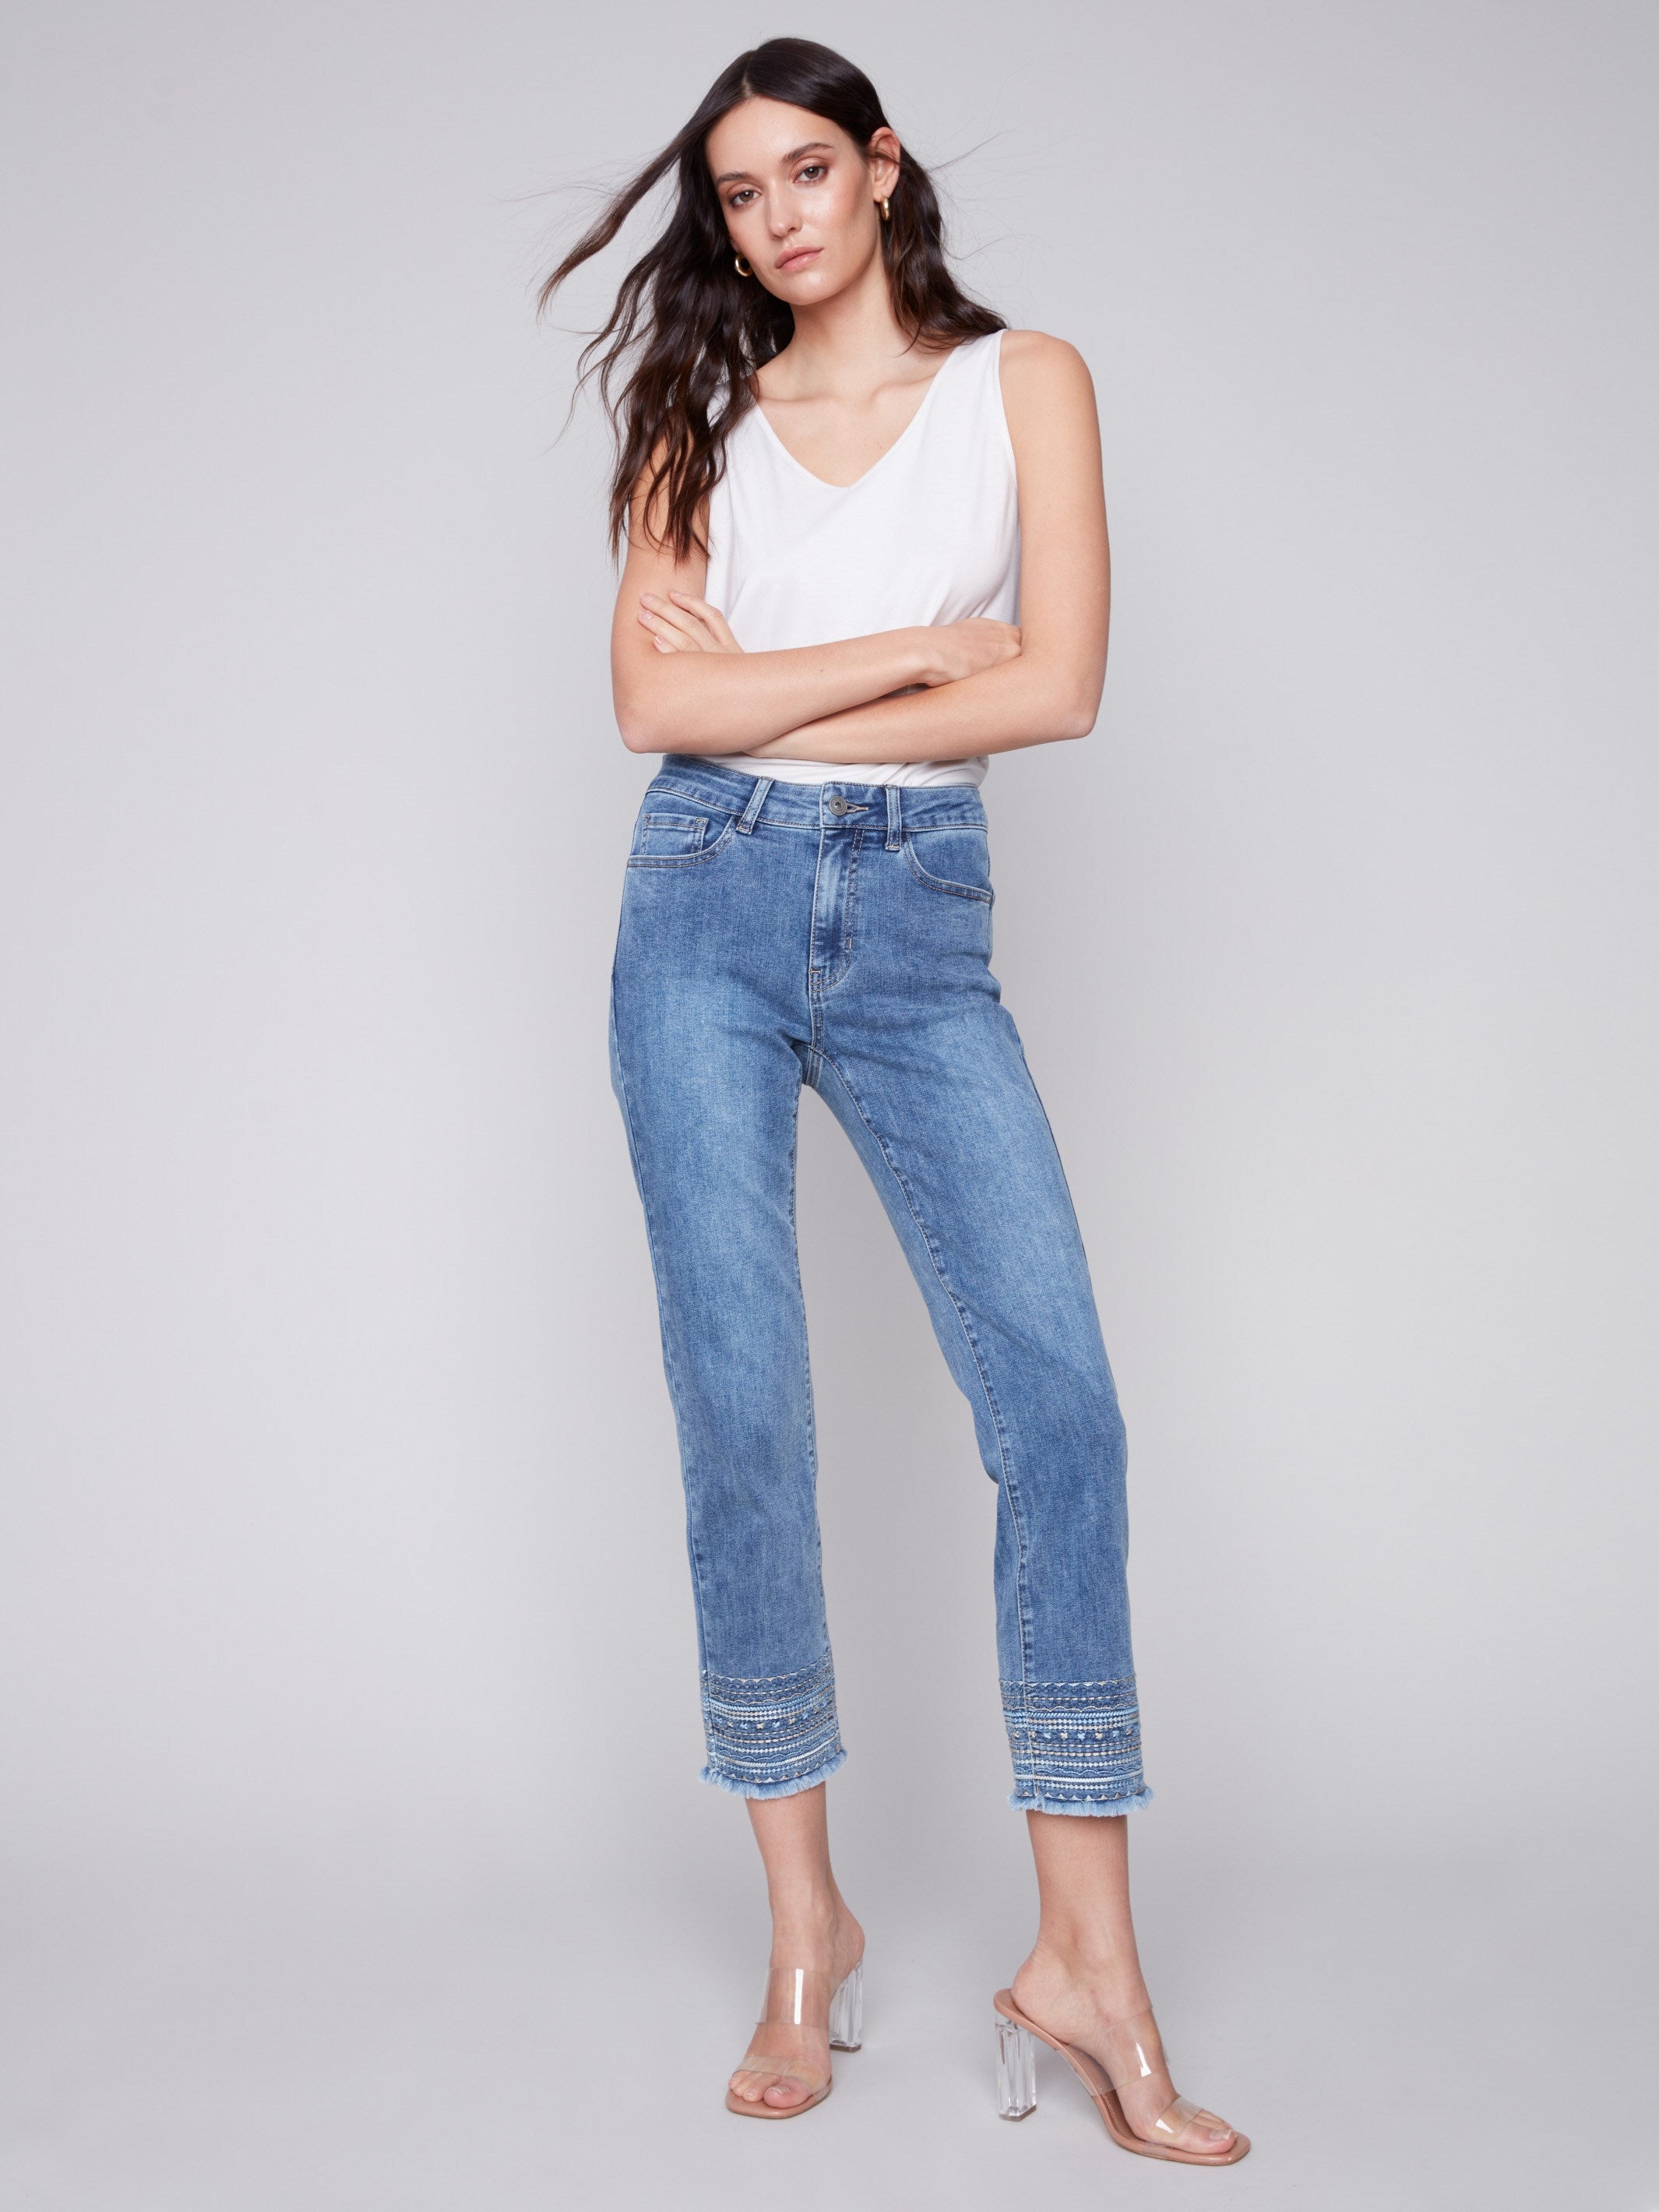 Embroidered Hem Jeans - Medium Blue - Charlie B Collection Canada - Image 4